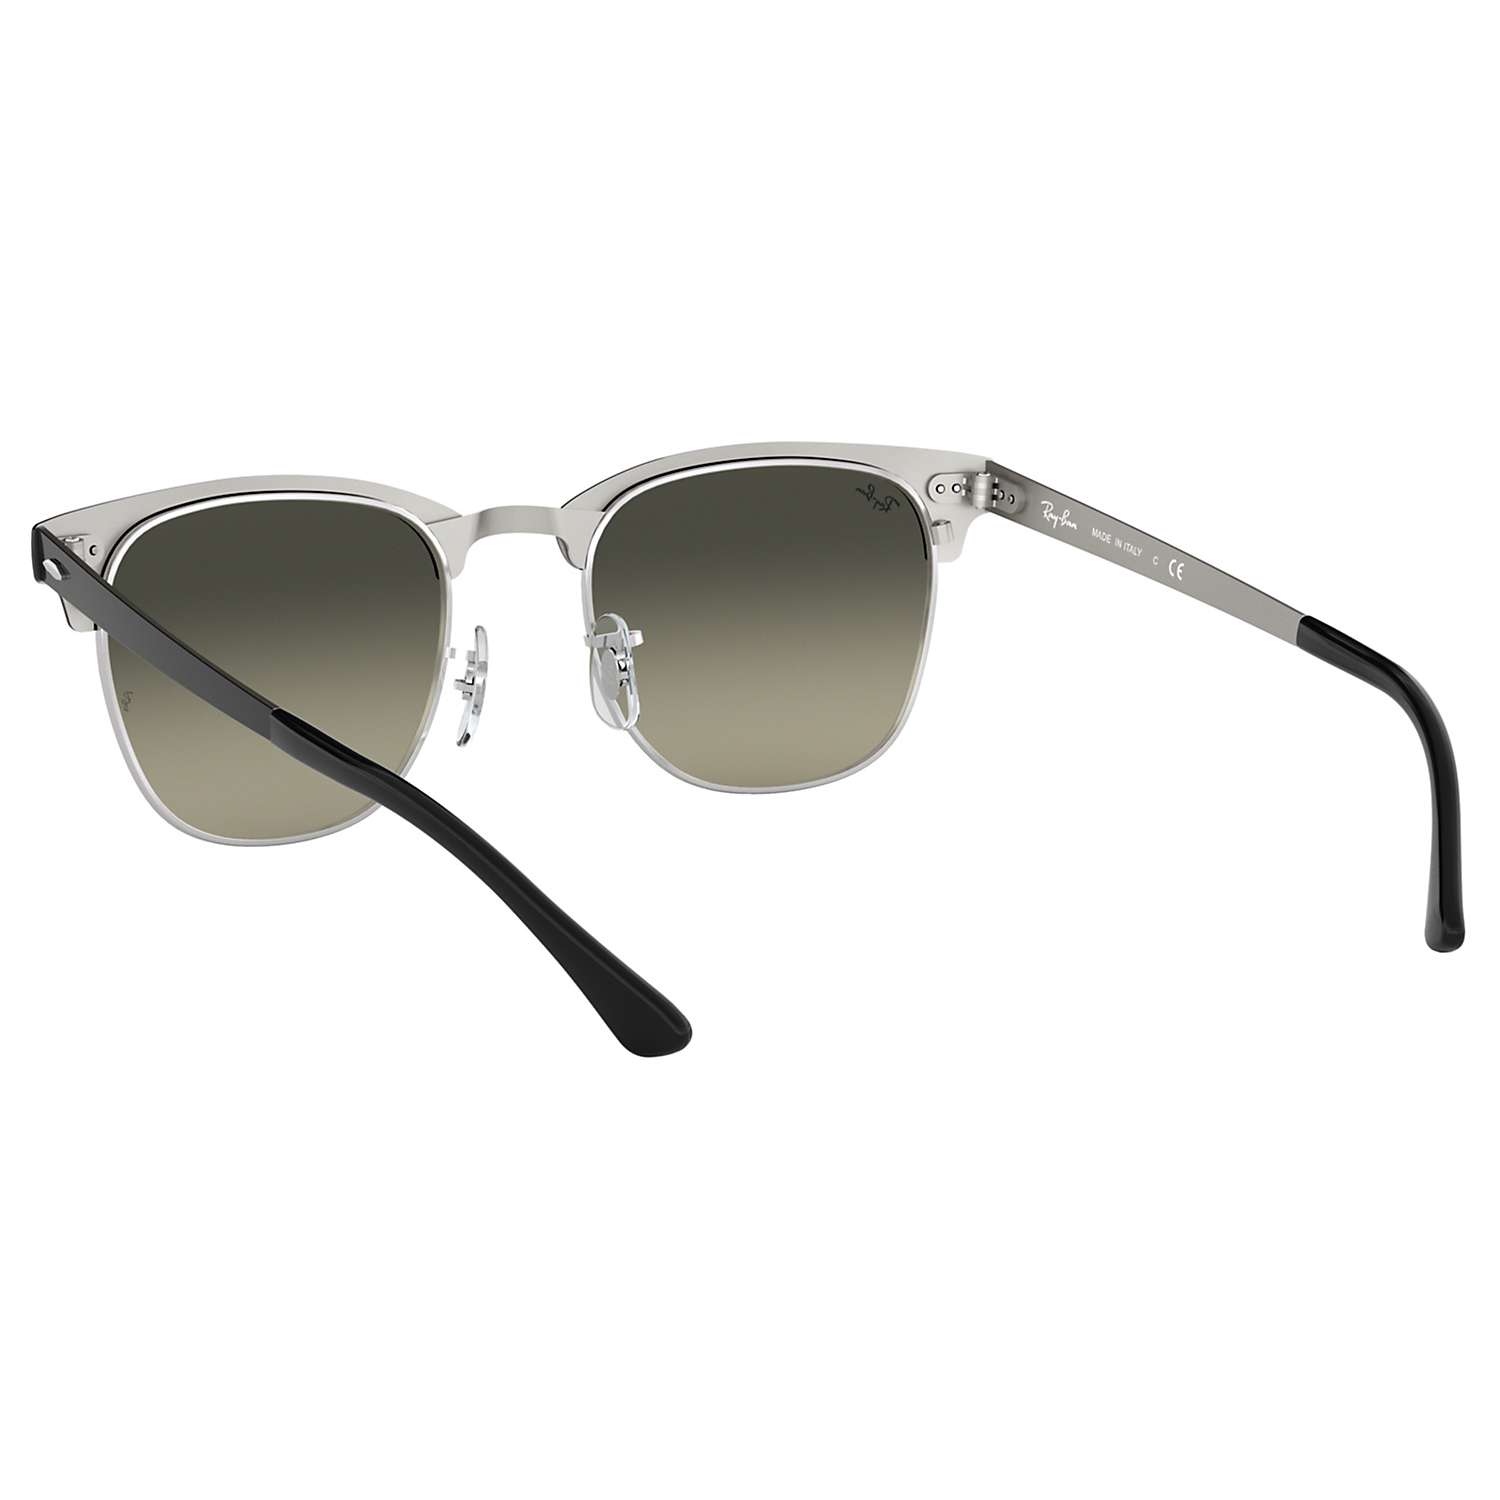 Buy Ray-Ban RB3716 Unisex Square Sunglasses Online at johnlewis.com